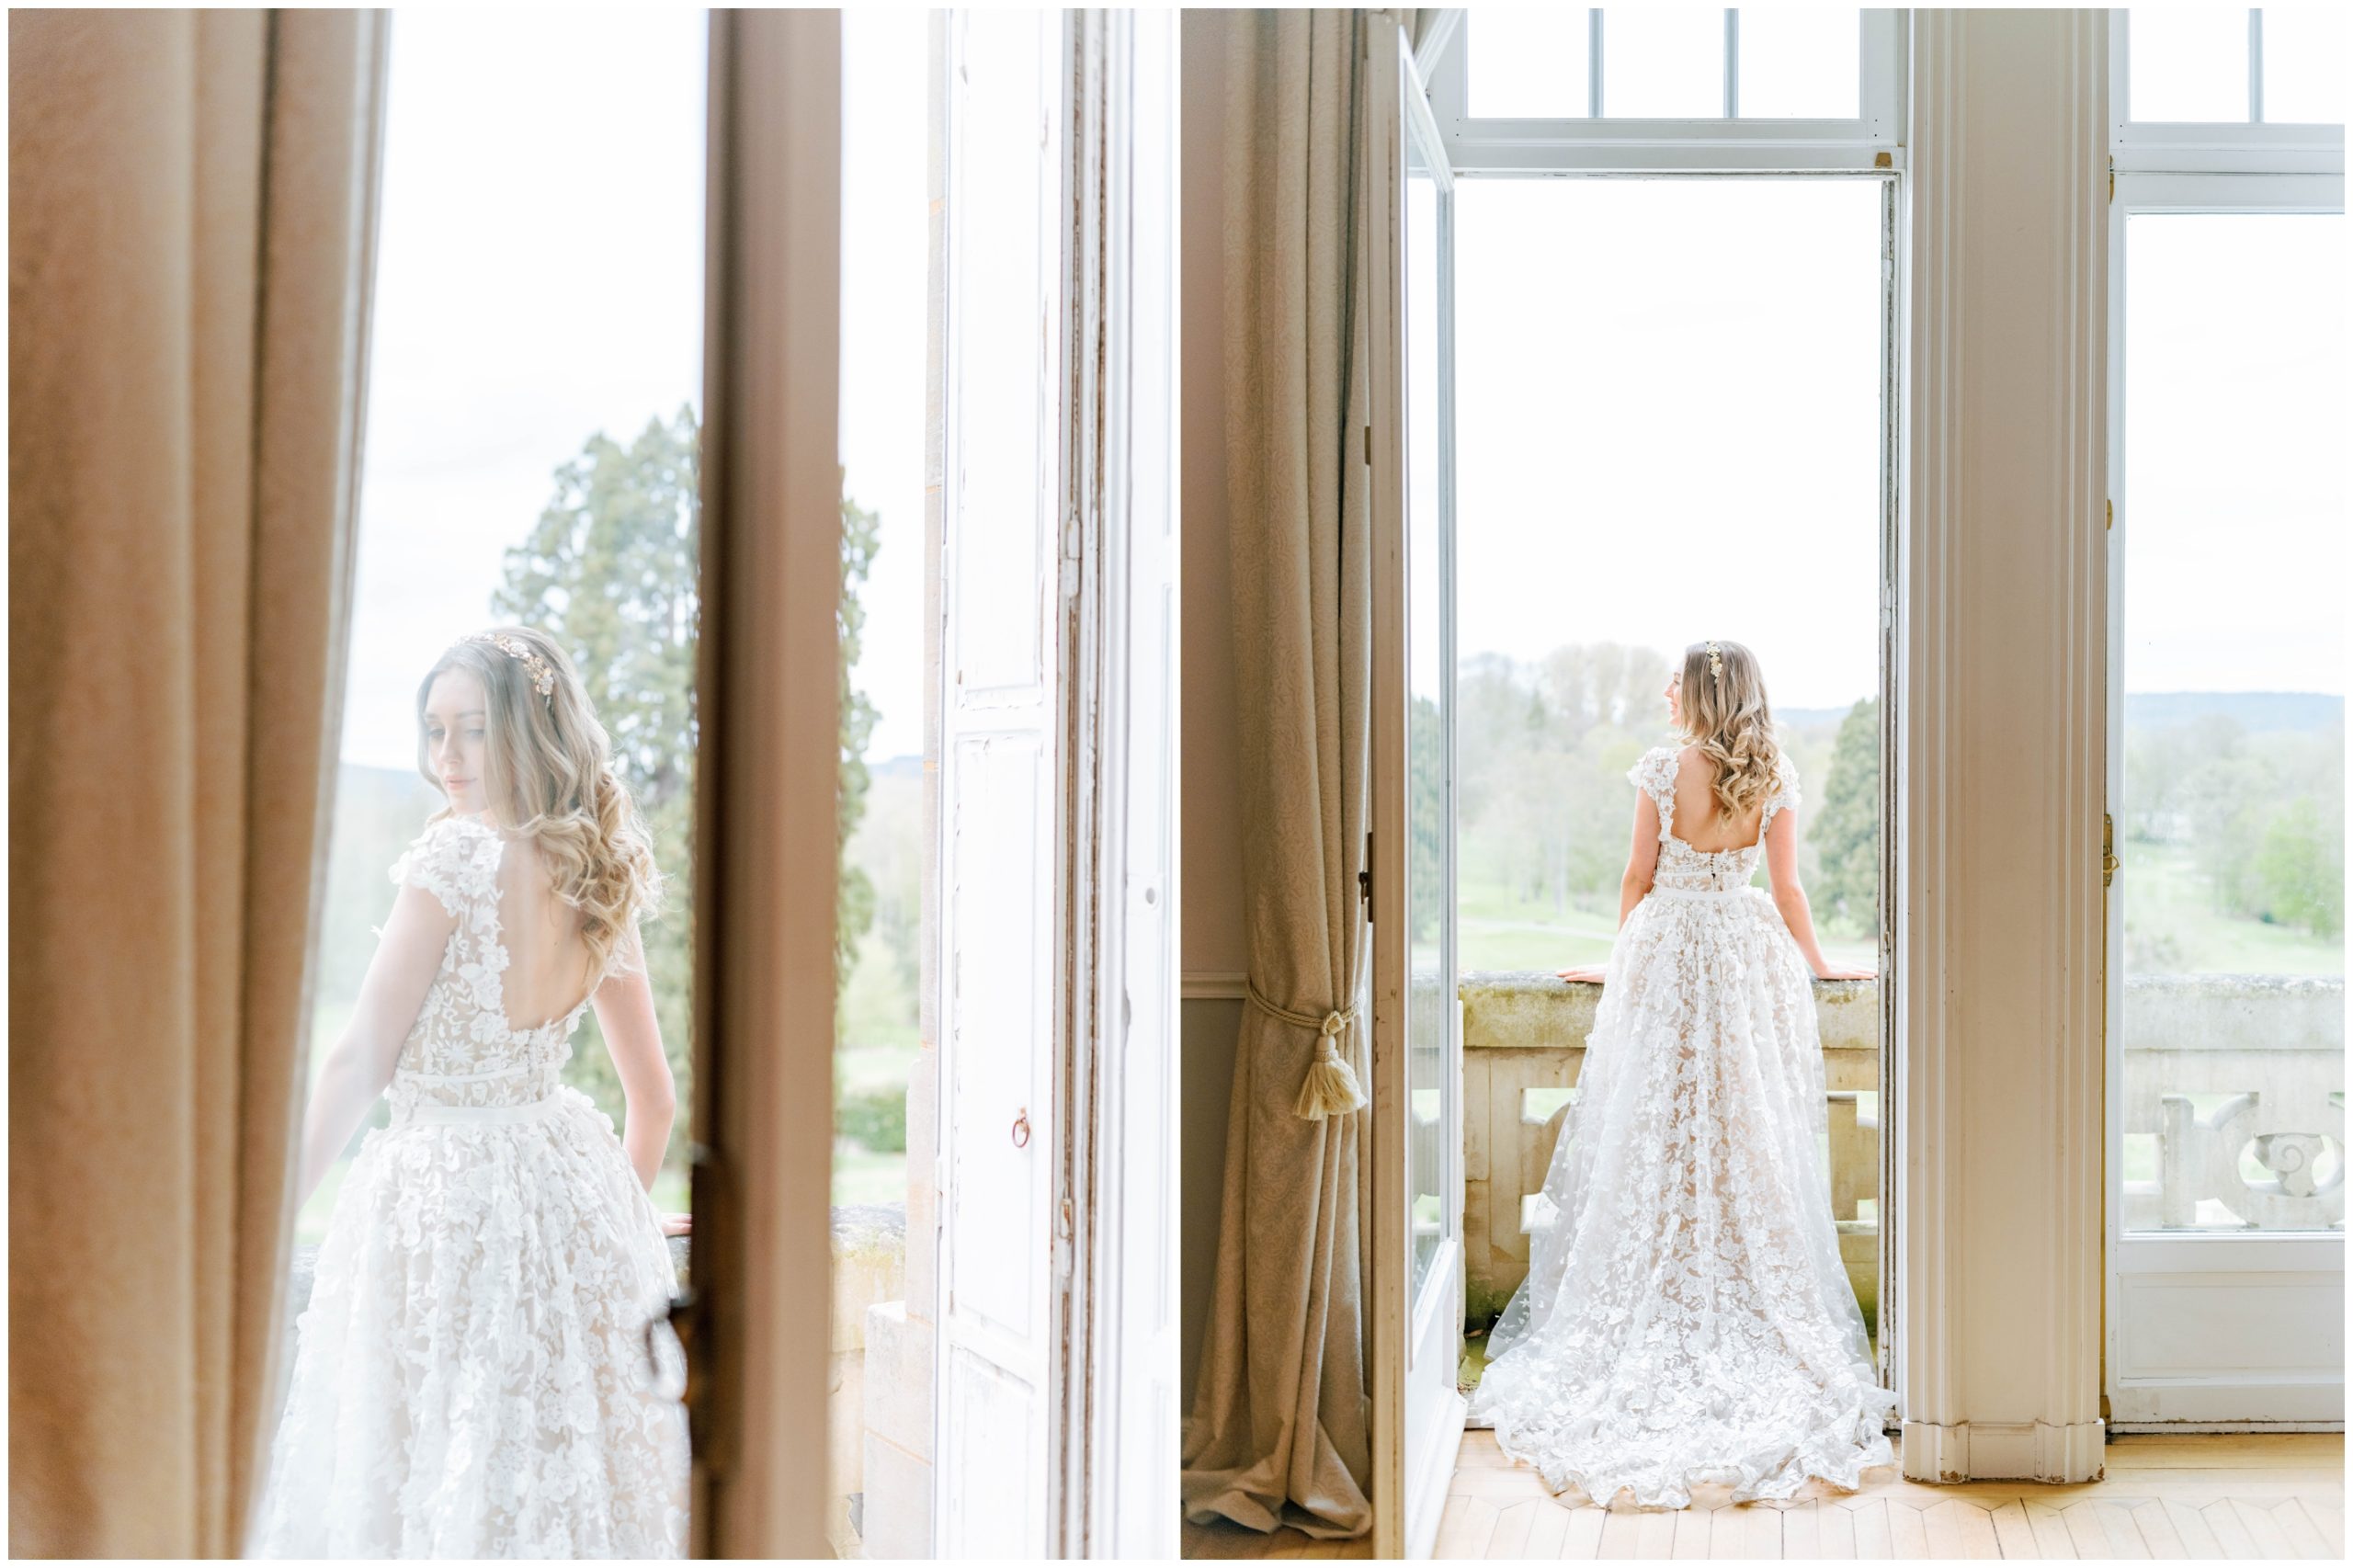 Bride in an off-the-shoulder wedding gown with 3D floral details